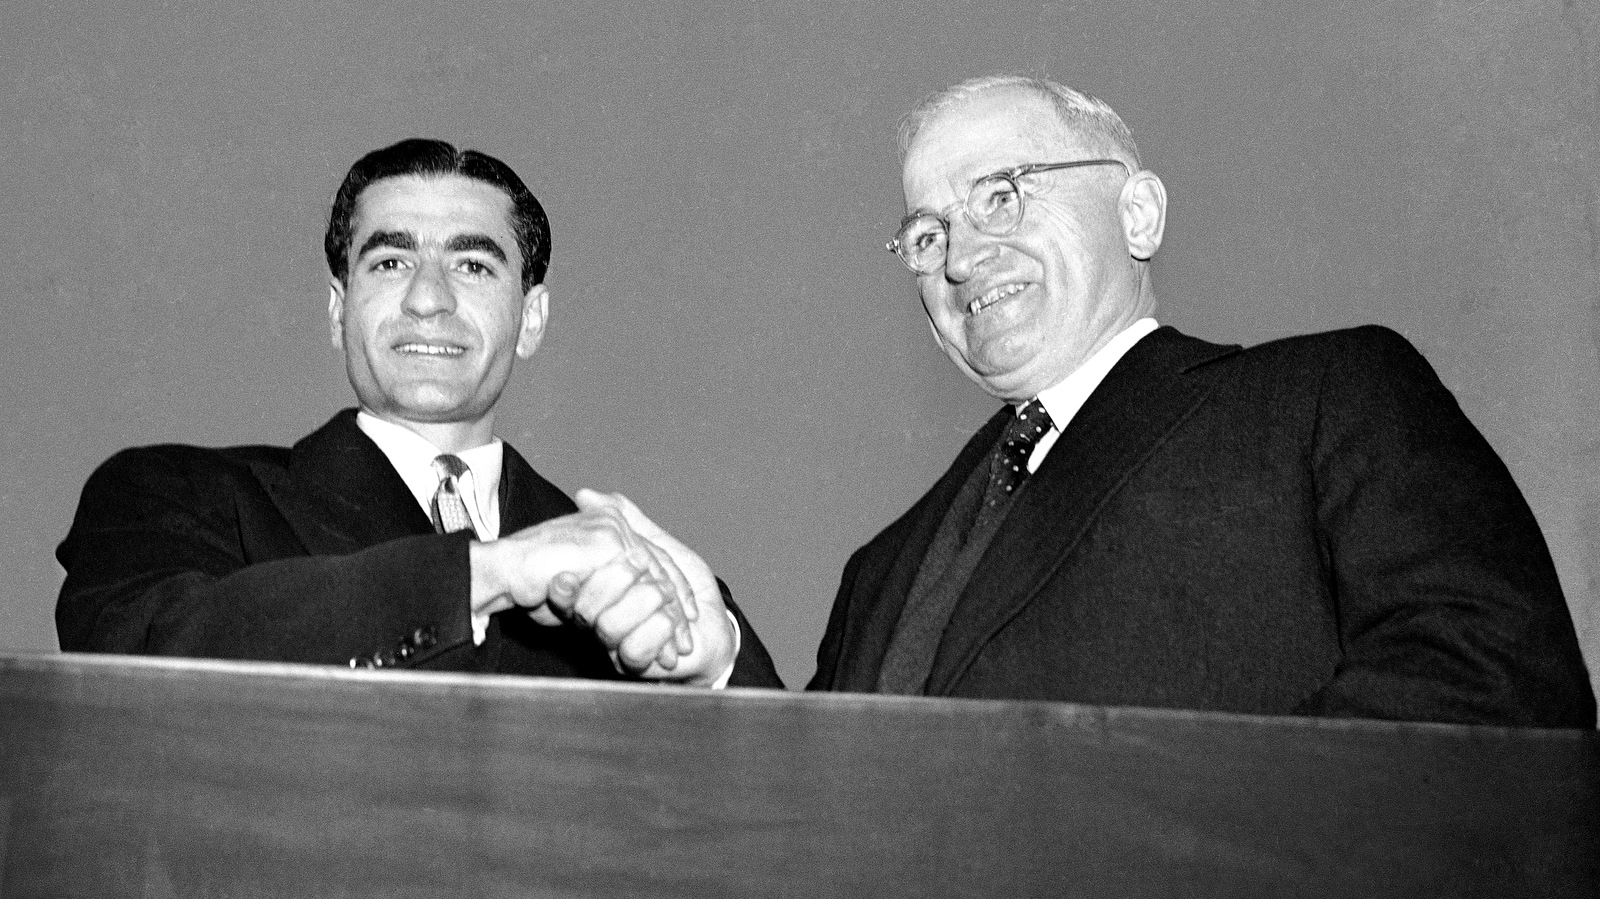 The Shah of Iran Reza Pahlavi, left, and President Harry Truman pose on the speakers rostrum during welcoming ceremonies at National Airport on Nov. 16, 1949 in Washington. (AP Photo)